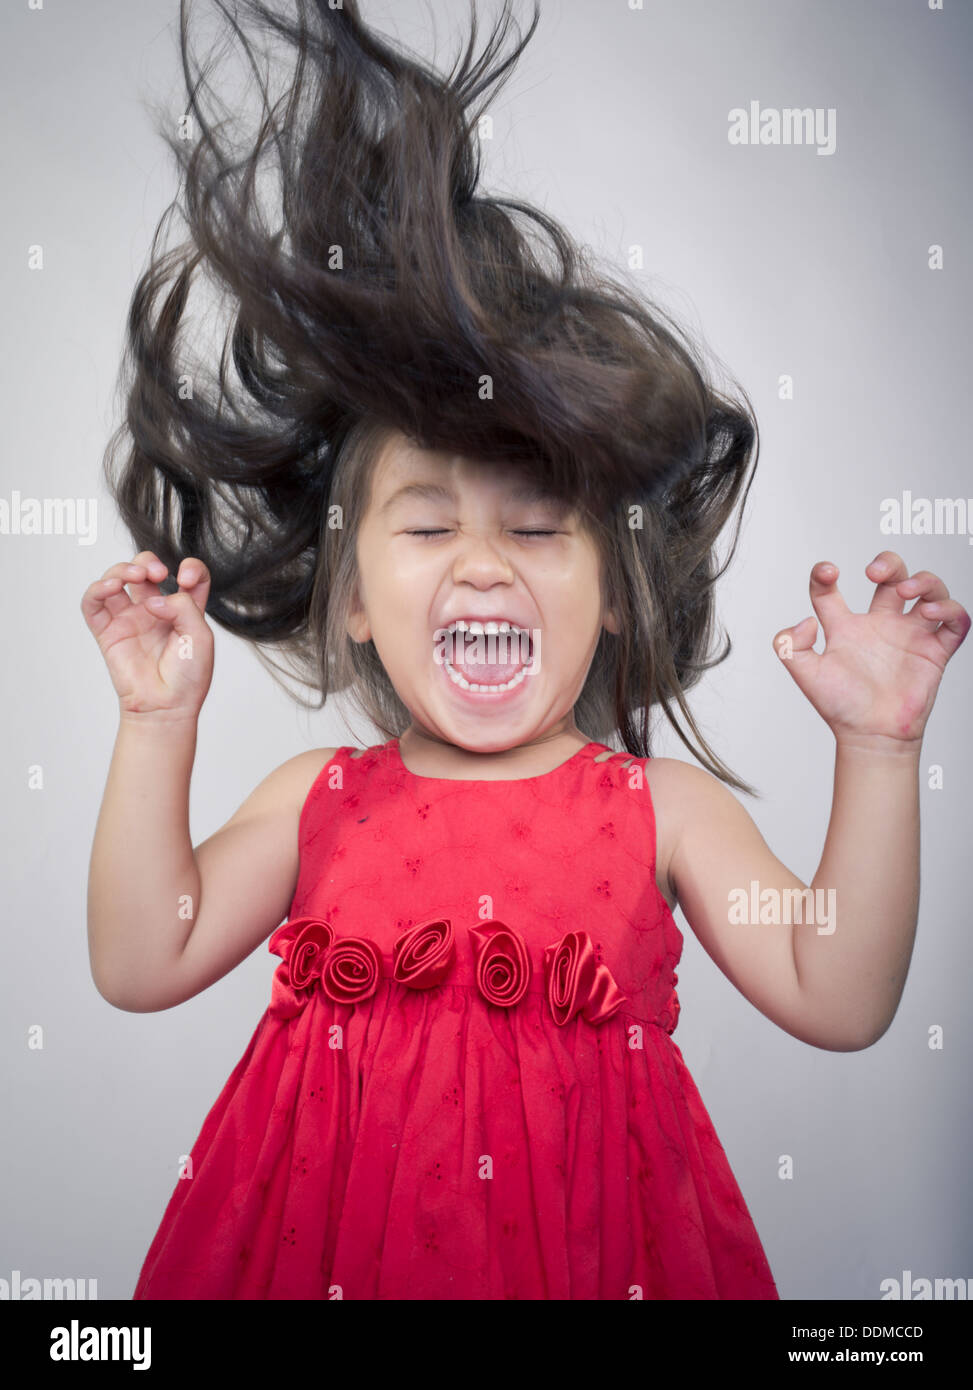 Laughing child with hair flying Stock Photo